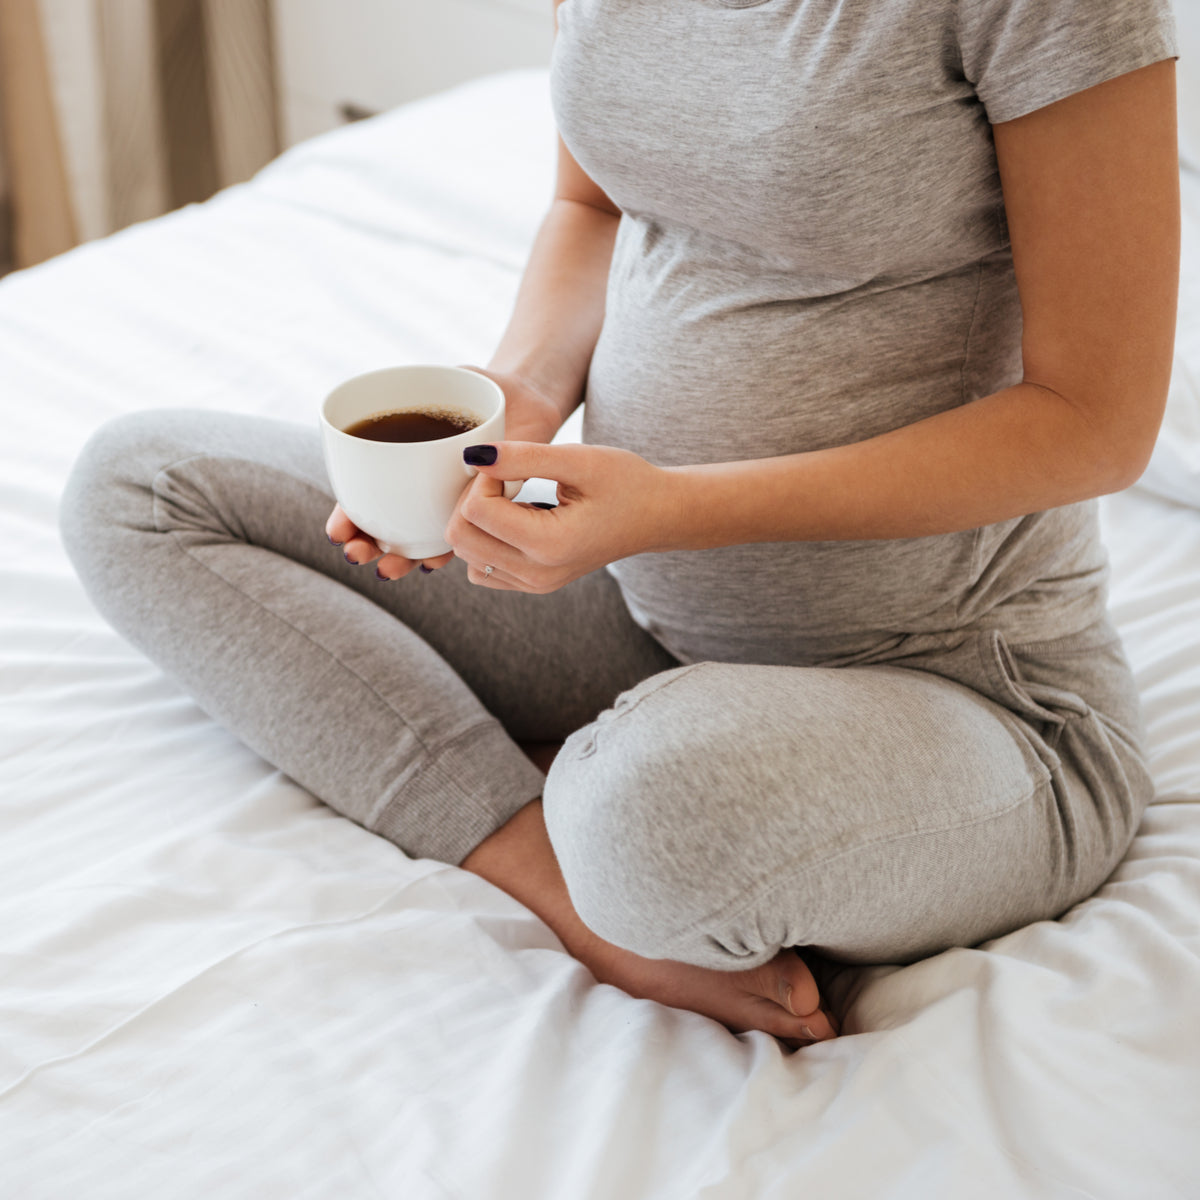 Is Low Acid Coffee Better for Pregnant and Nursing Moms?